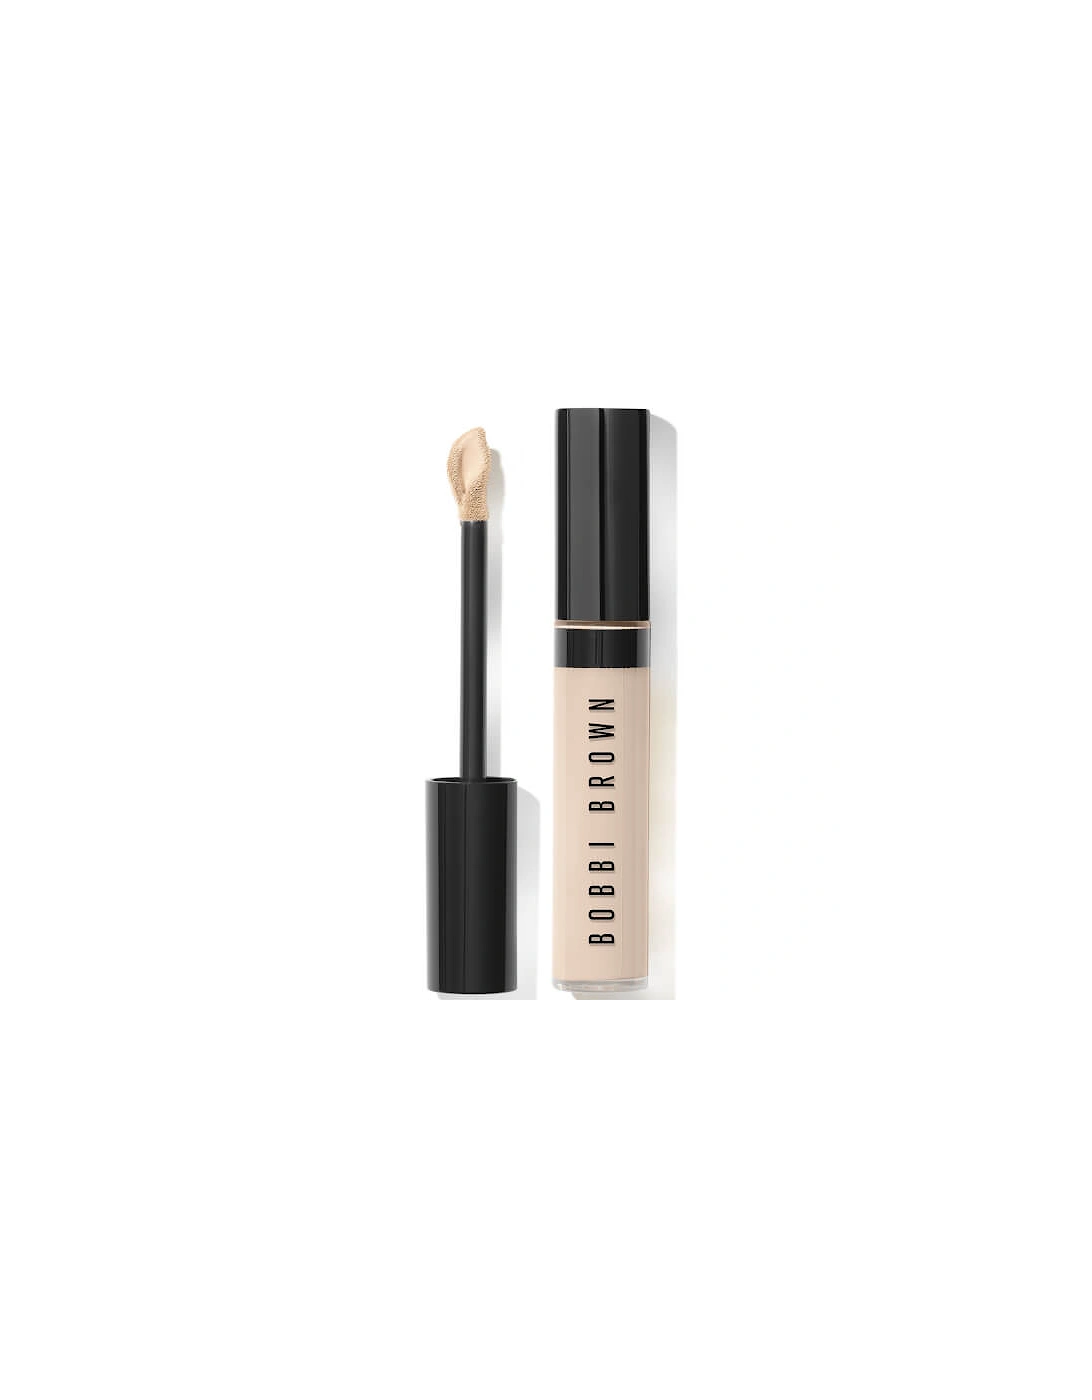 Skin Full Cover Concealer - Warm Almond, 2 of 1